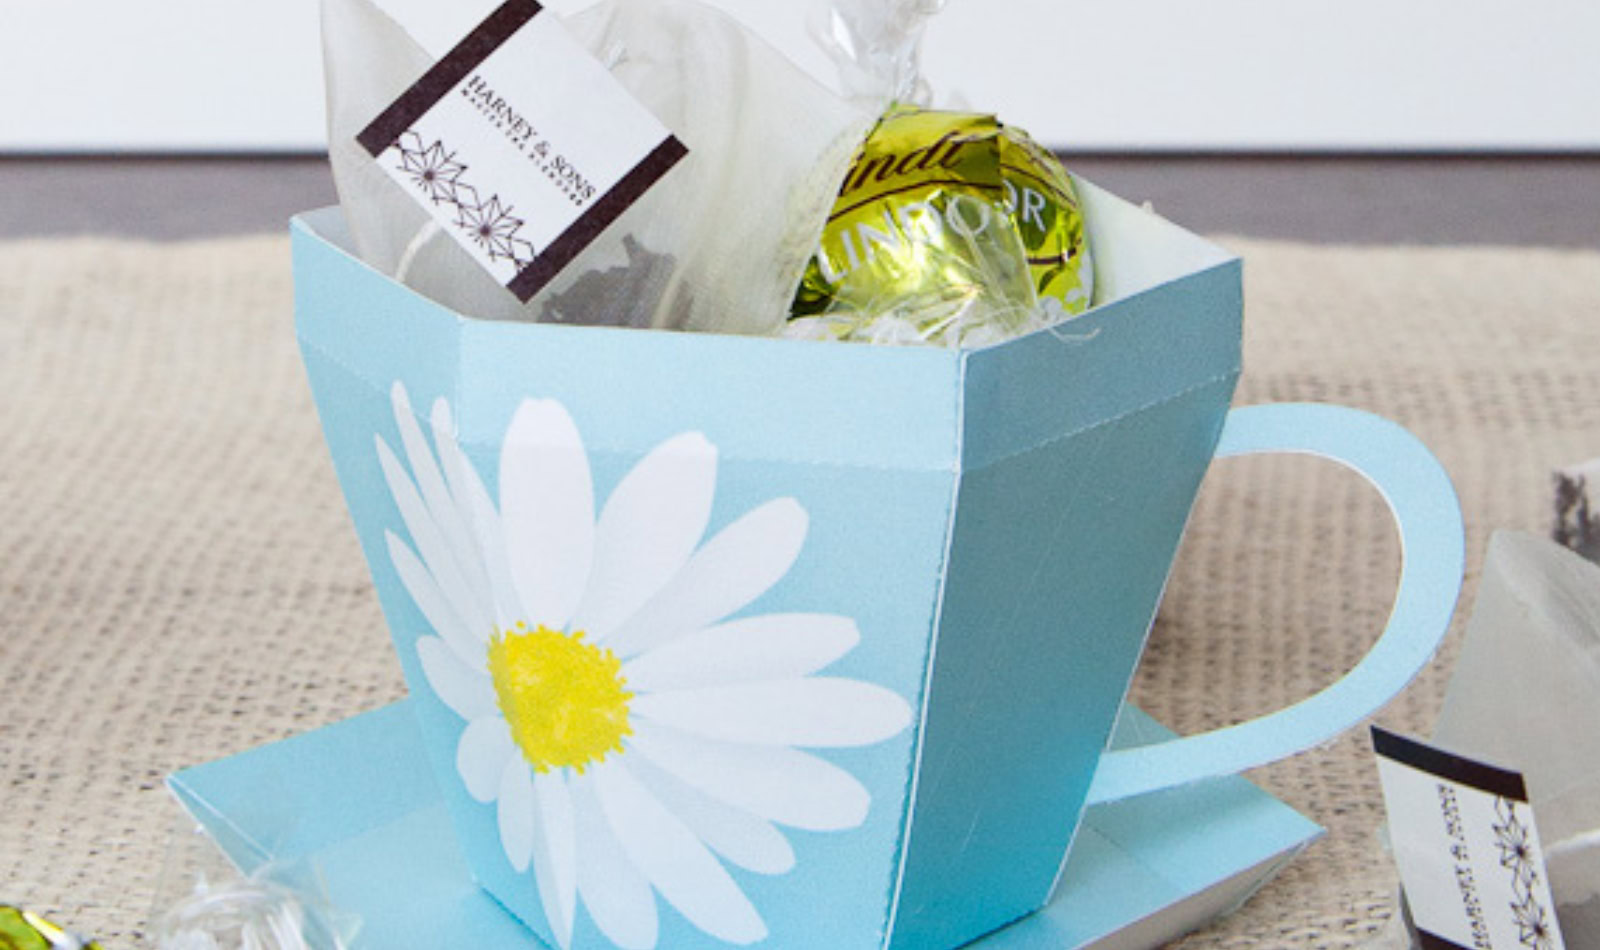 Image of paper tea cup holding tea bags and chocolate balls.